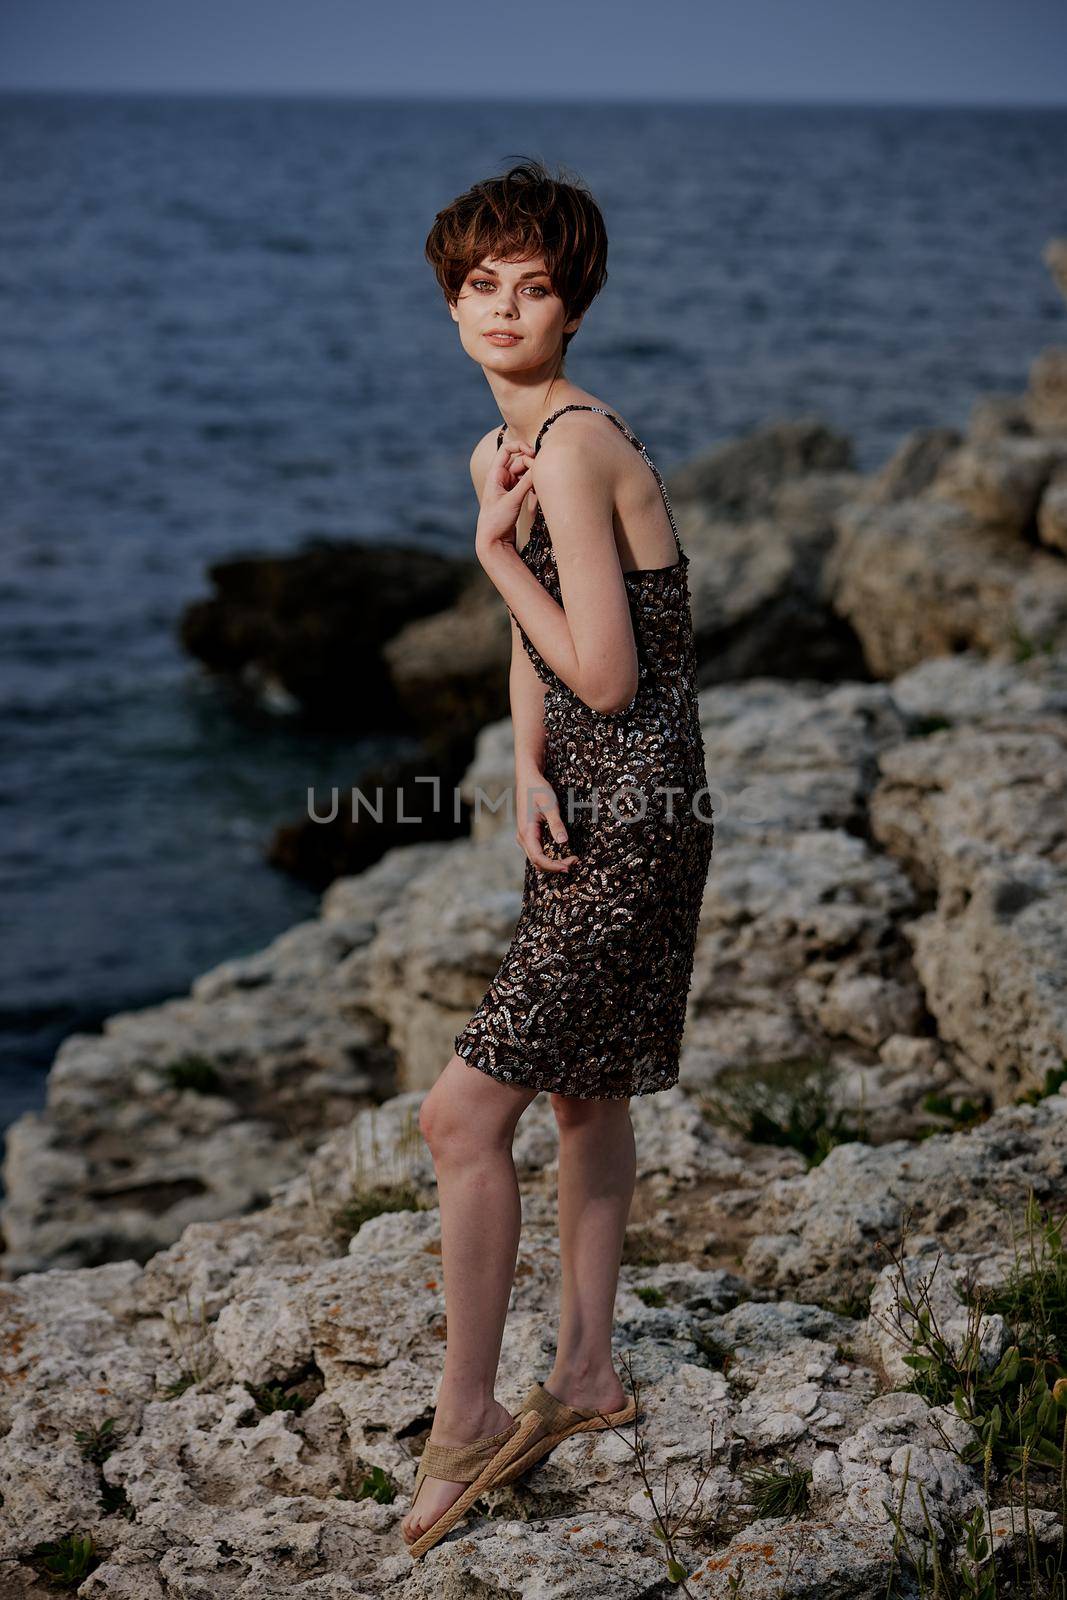 short haired woman standing on stones posing in beach dress Lifestyle. High quality photo